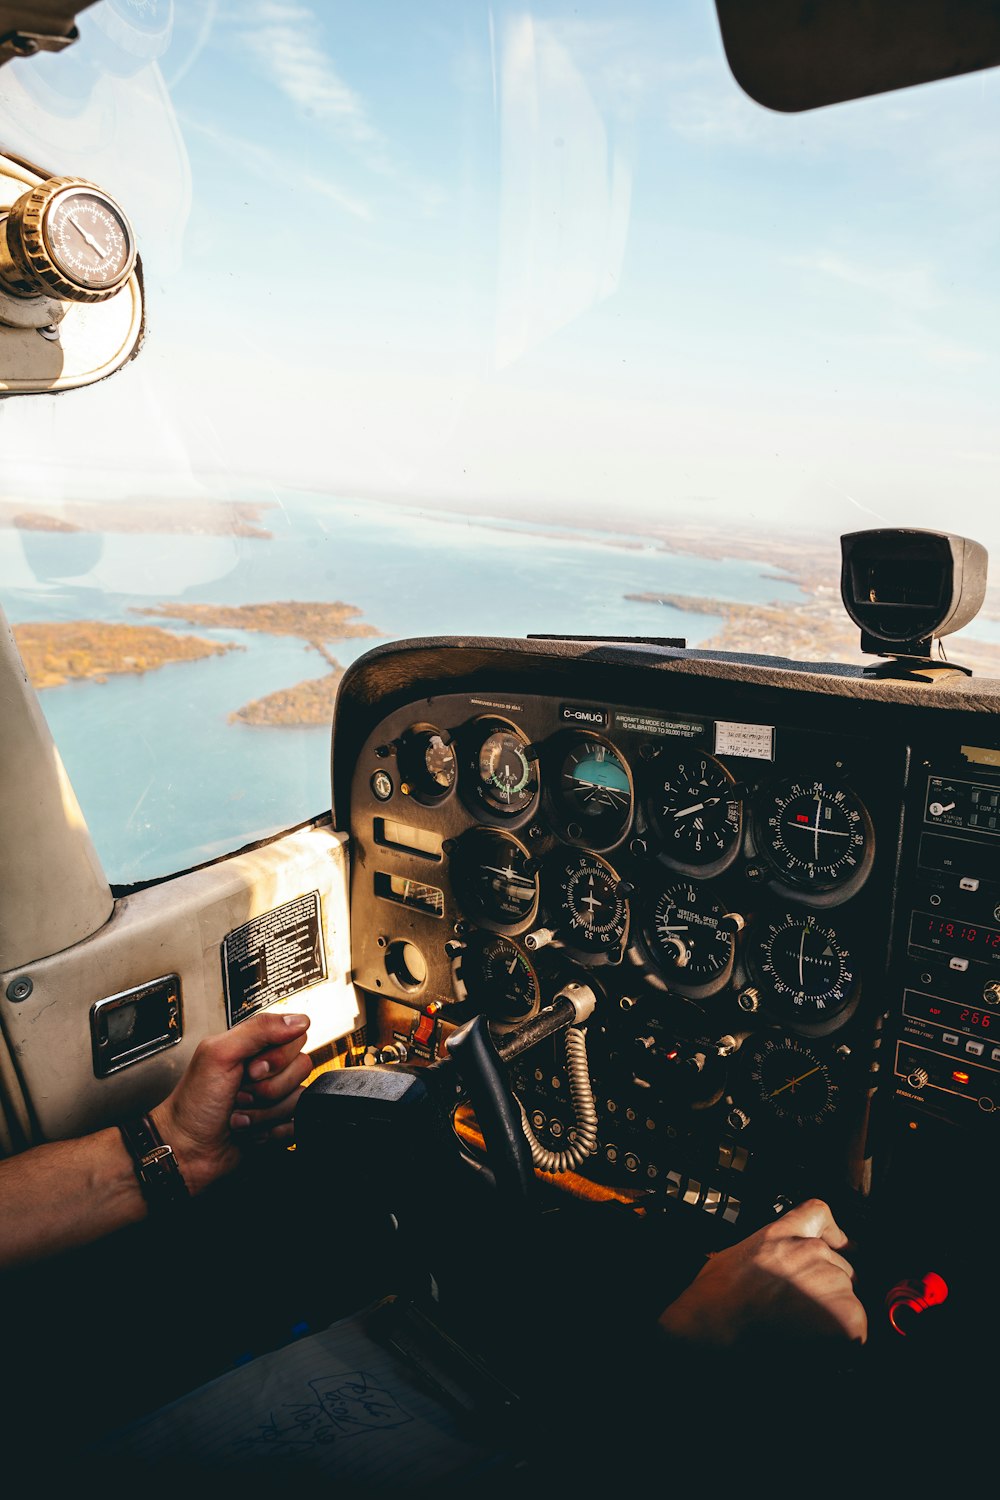 500 Pilot Pictures Hd Download Free Images On Unsplash